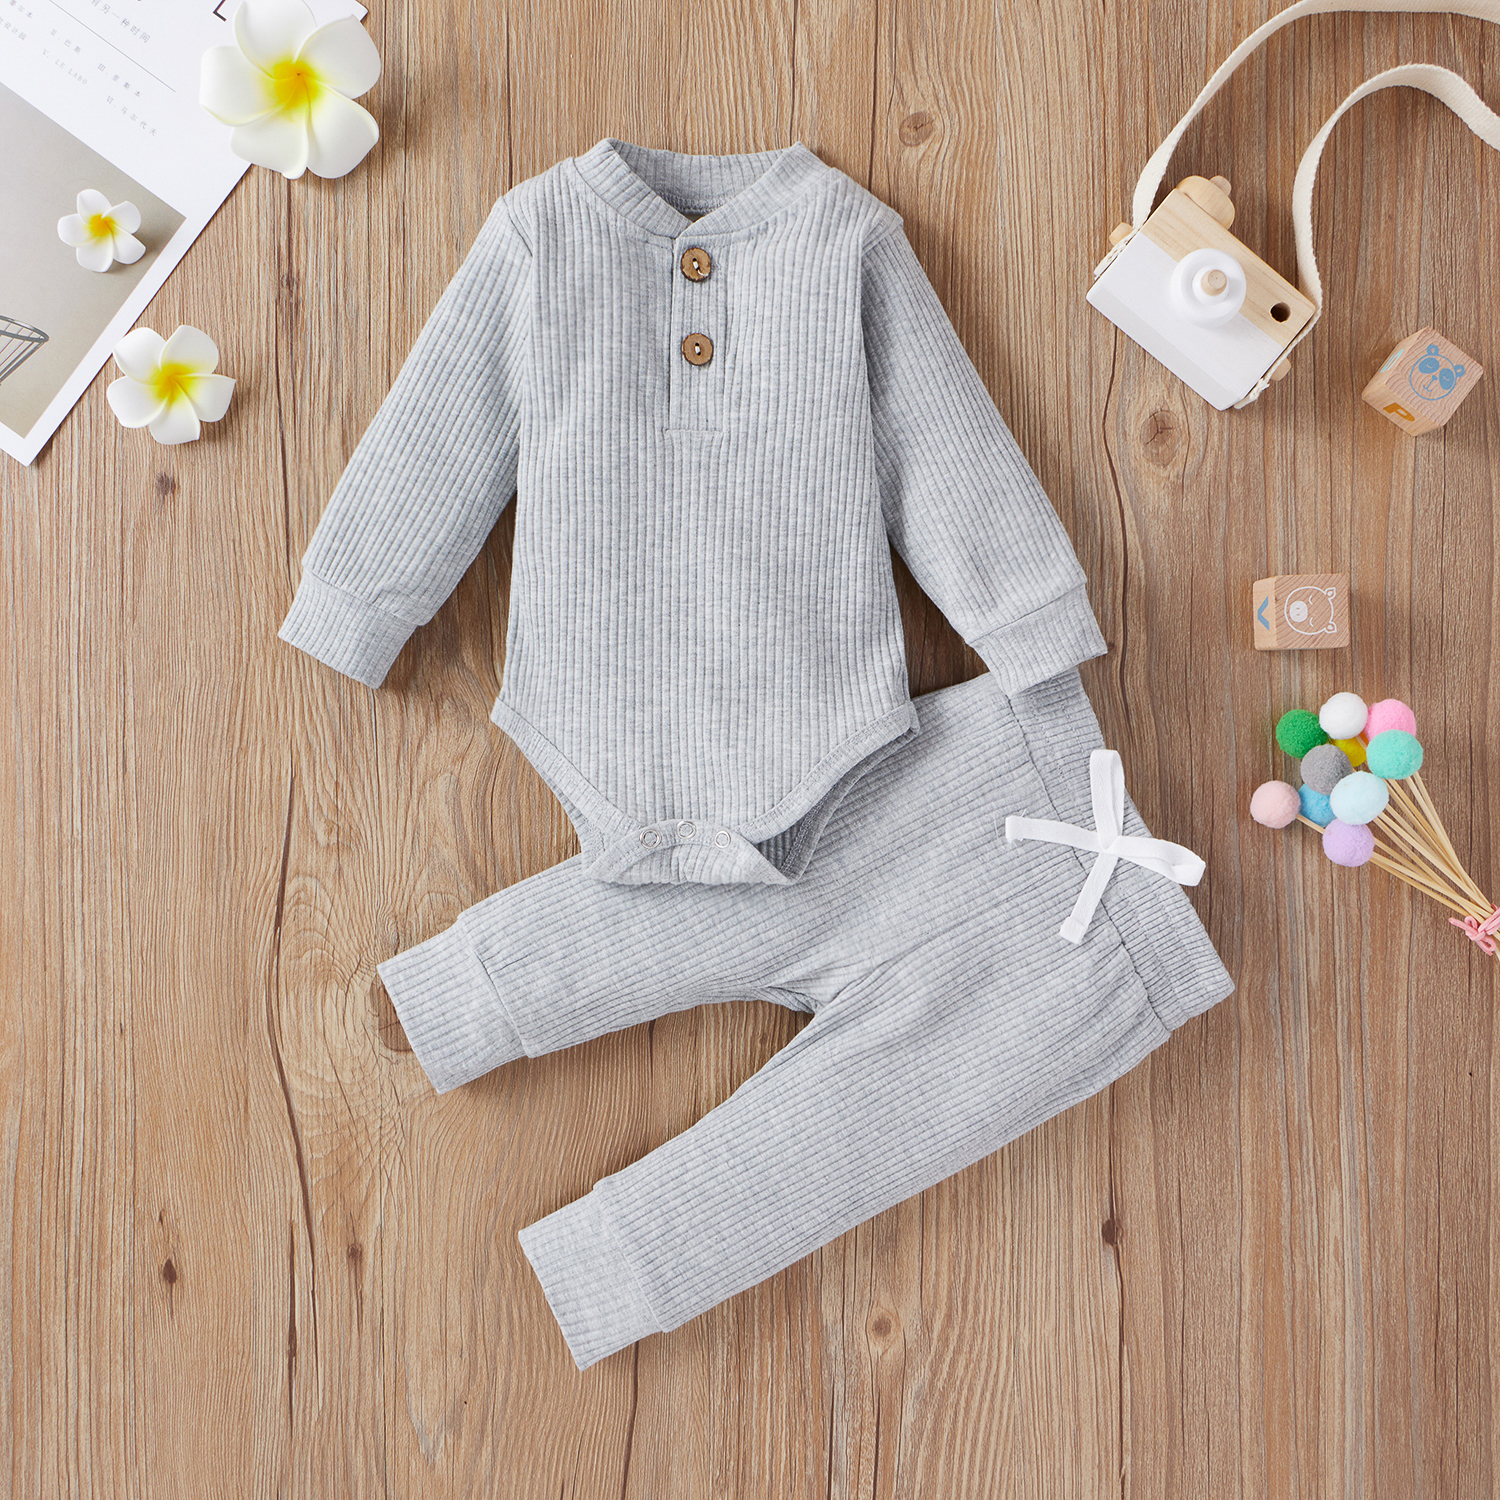 jaweiw Baby Girl Boy Fall Clothes 3 6 12 18 24 Months Outfits Long Sleeve Knitted Cotton Romper Pants Infant Winter Sets - image 2 of 9